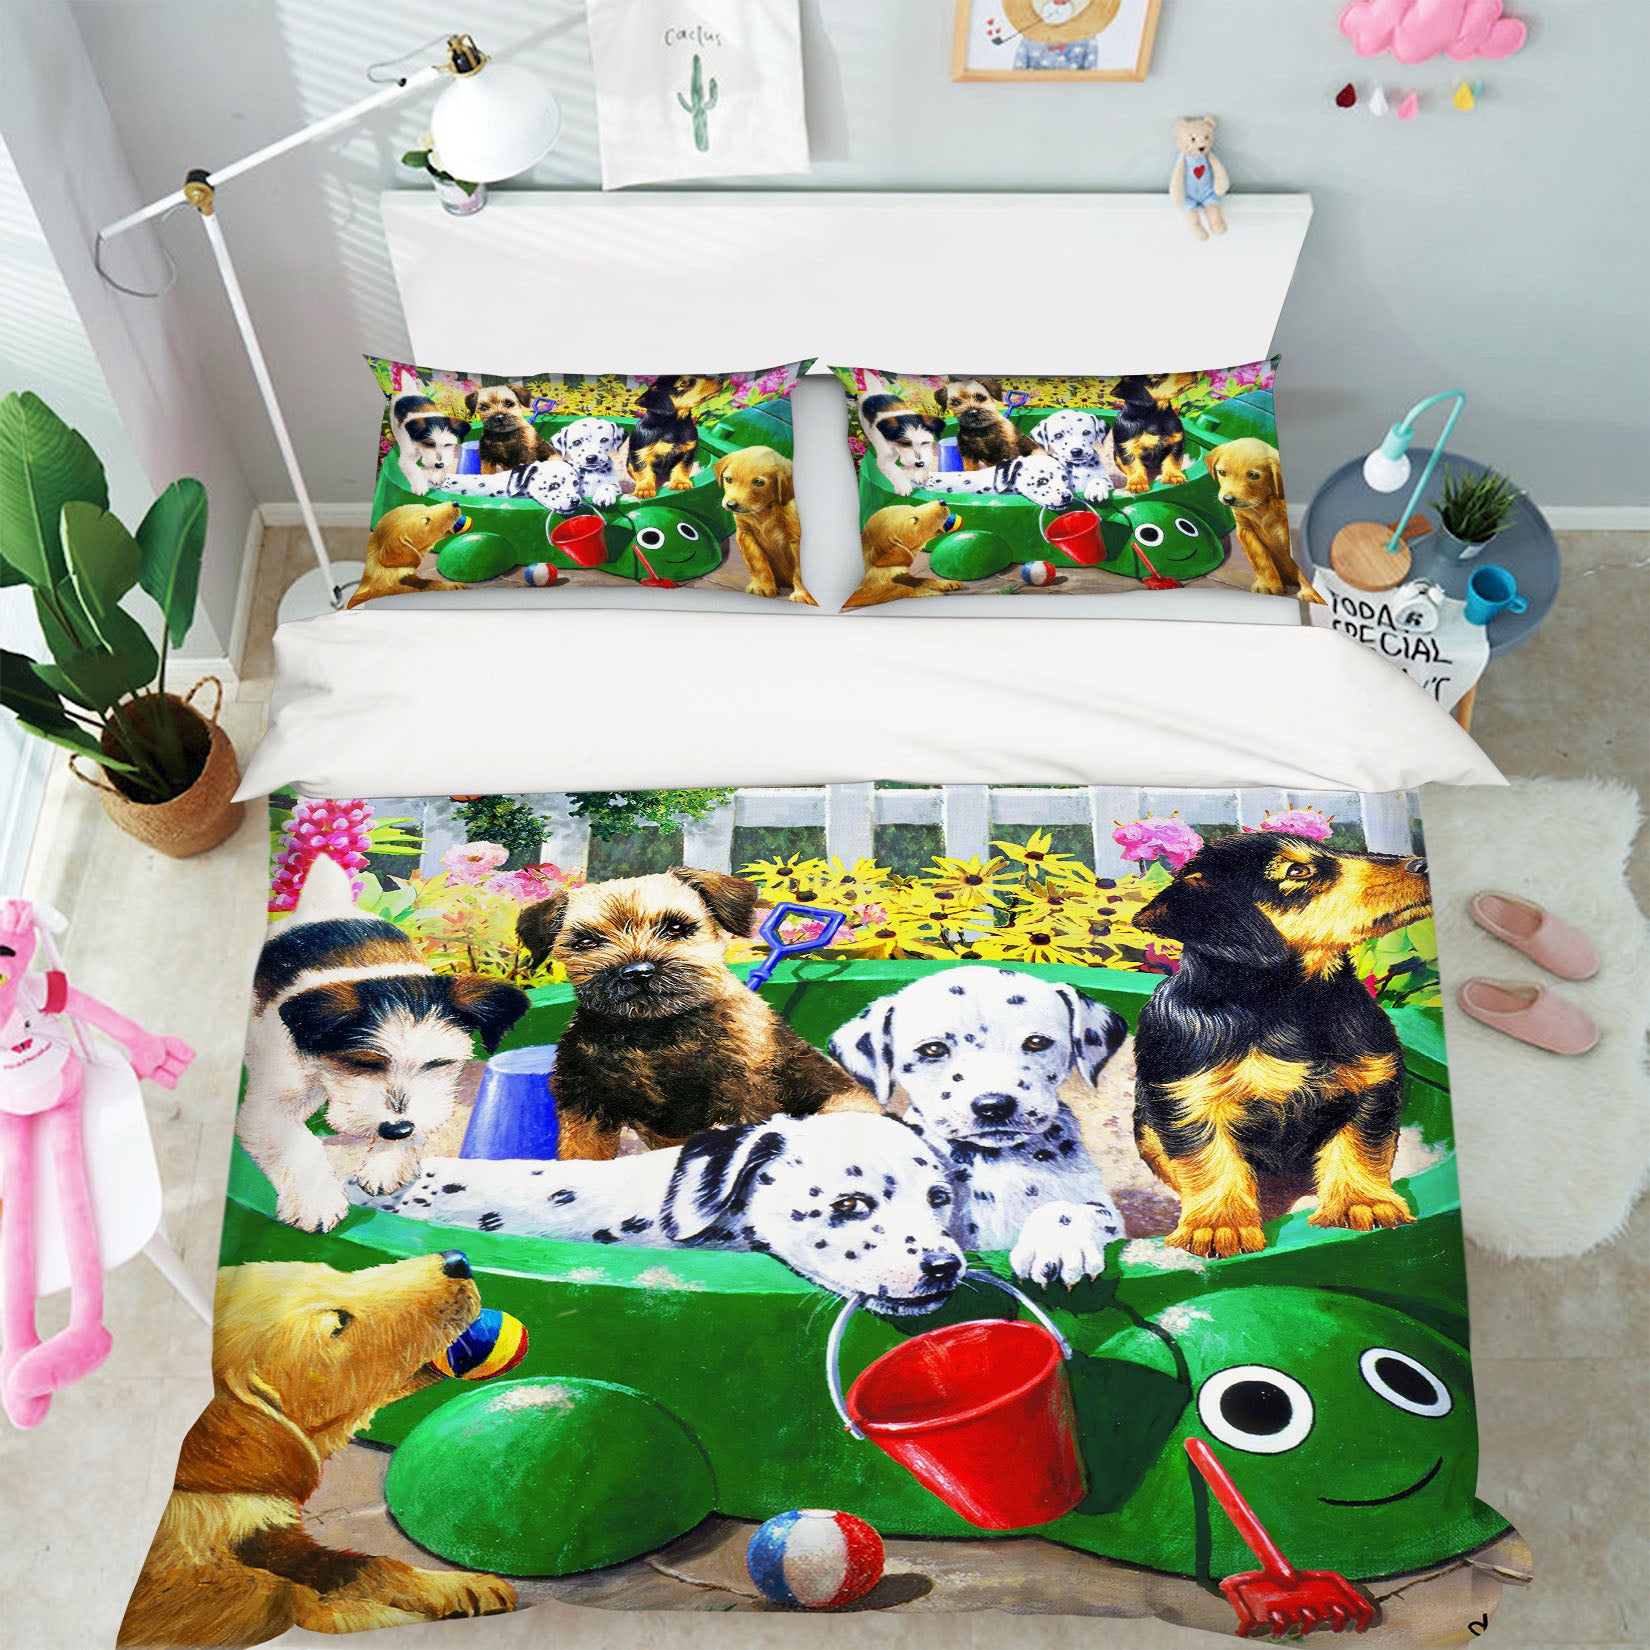 3D Puppy 12509 Kevin Walsh Bedding Bed Pillowcases Quilt